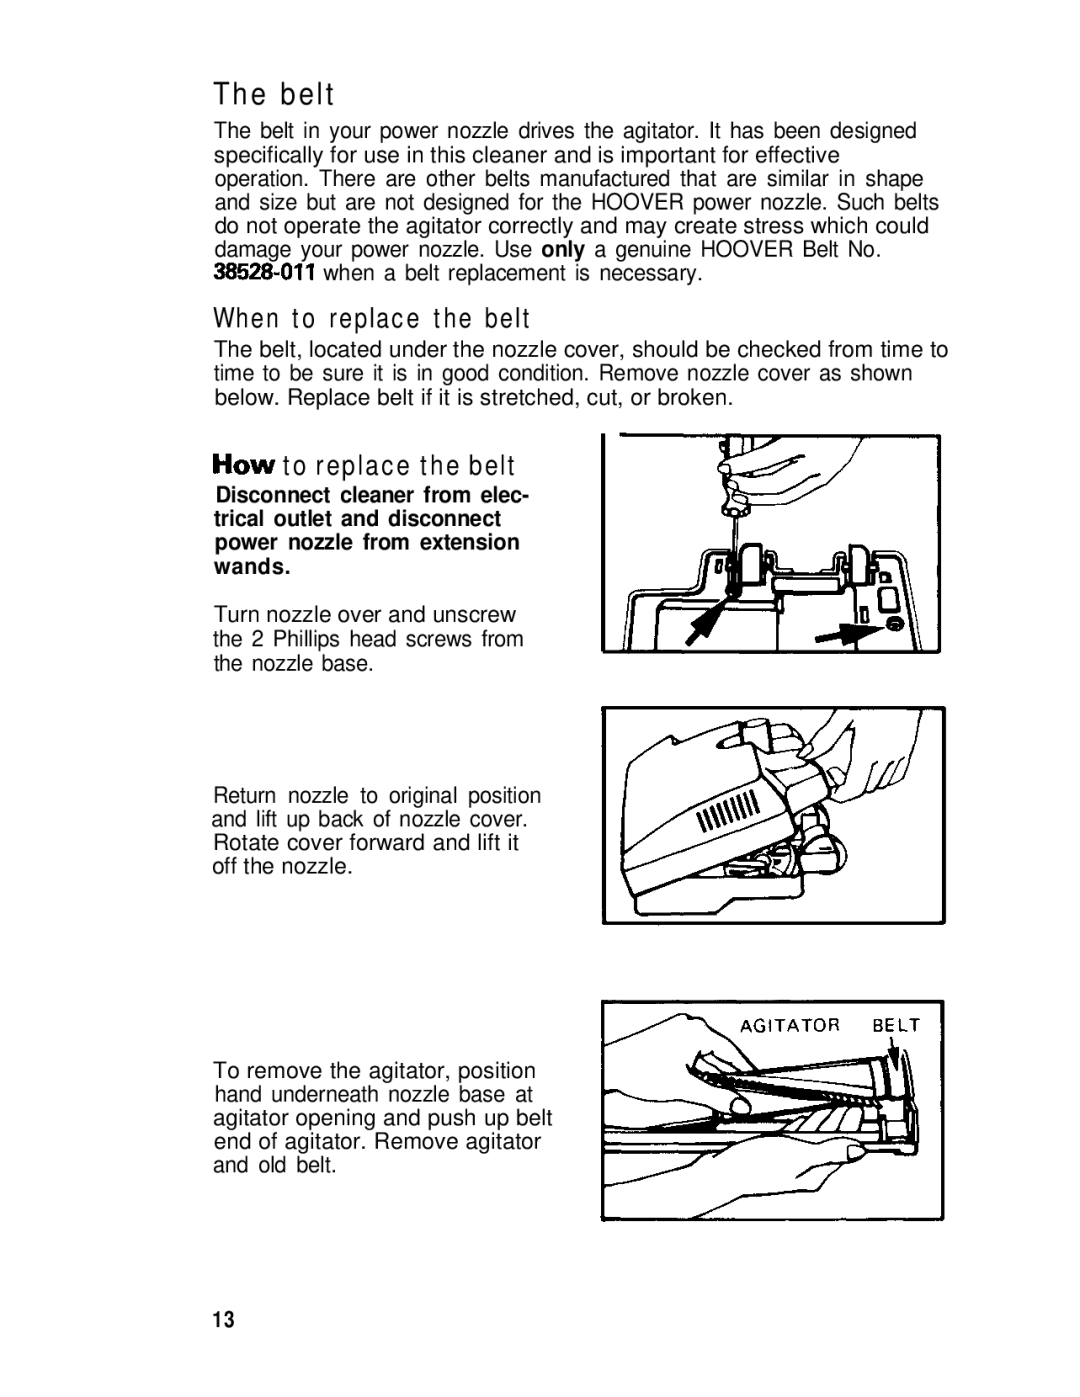 Hoover s3503 owner manual Belt, When to replace the belt, How to replace the belt 